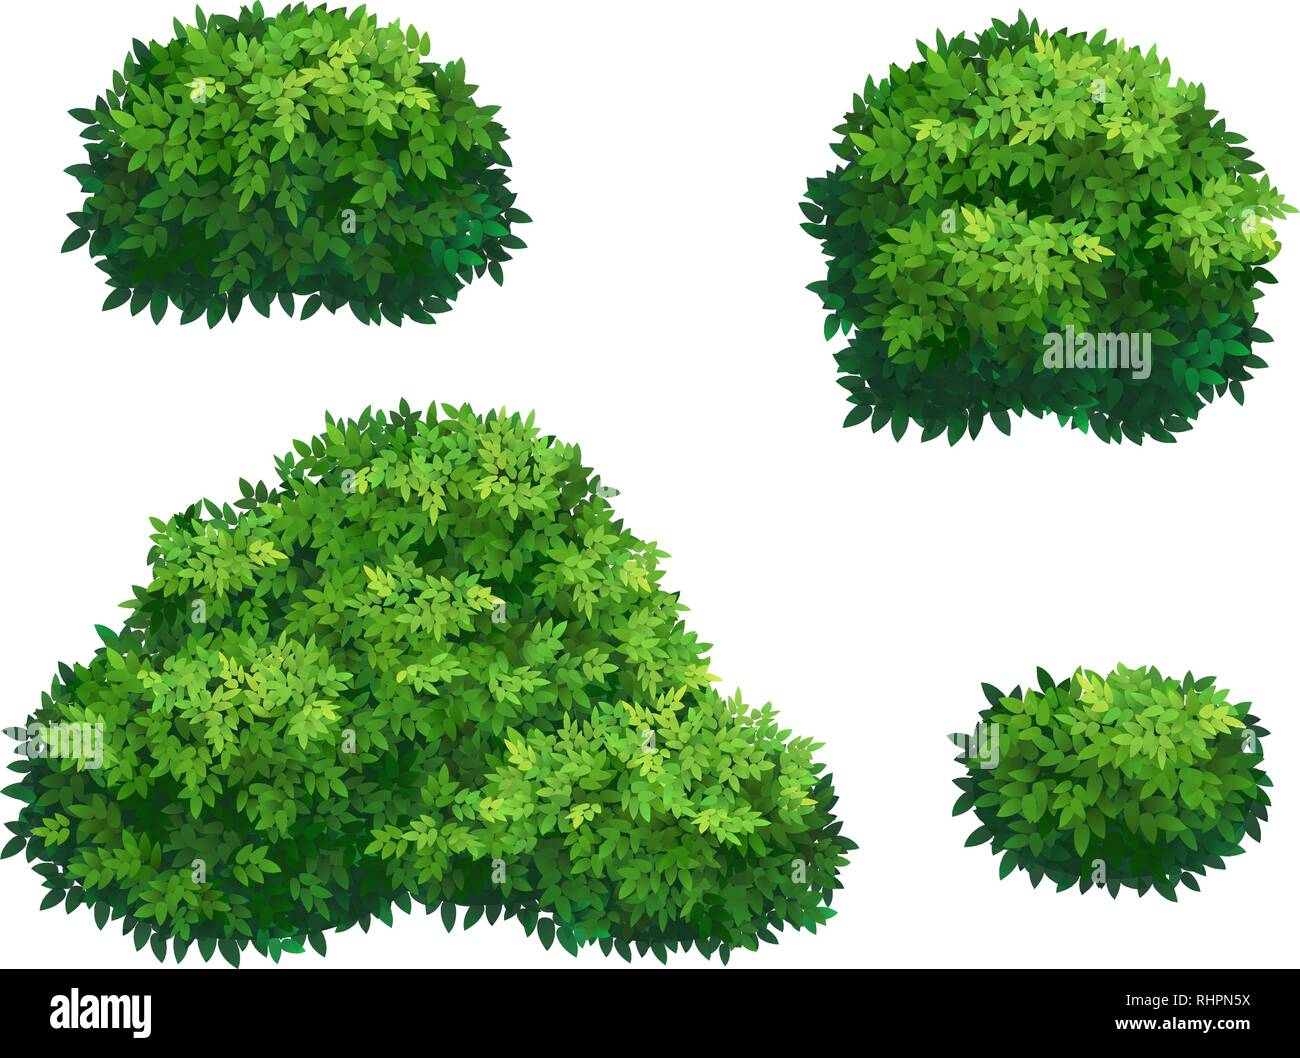 Green bushes and tree crown. Stock Vector